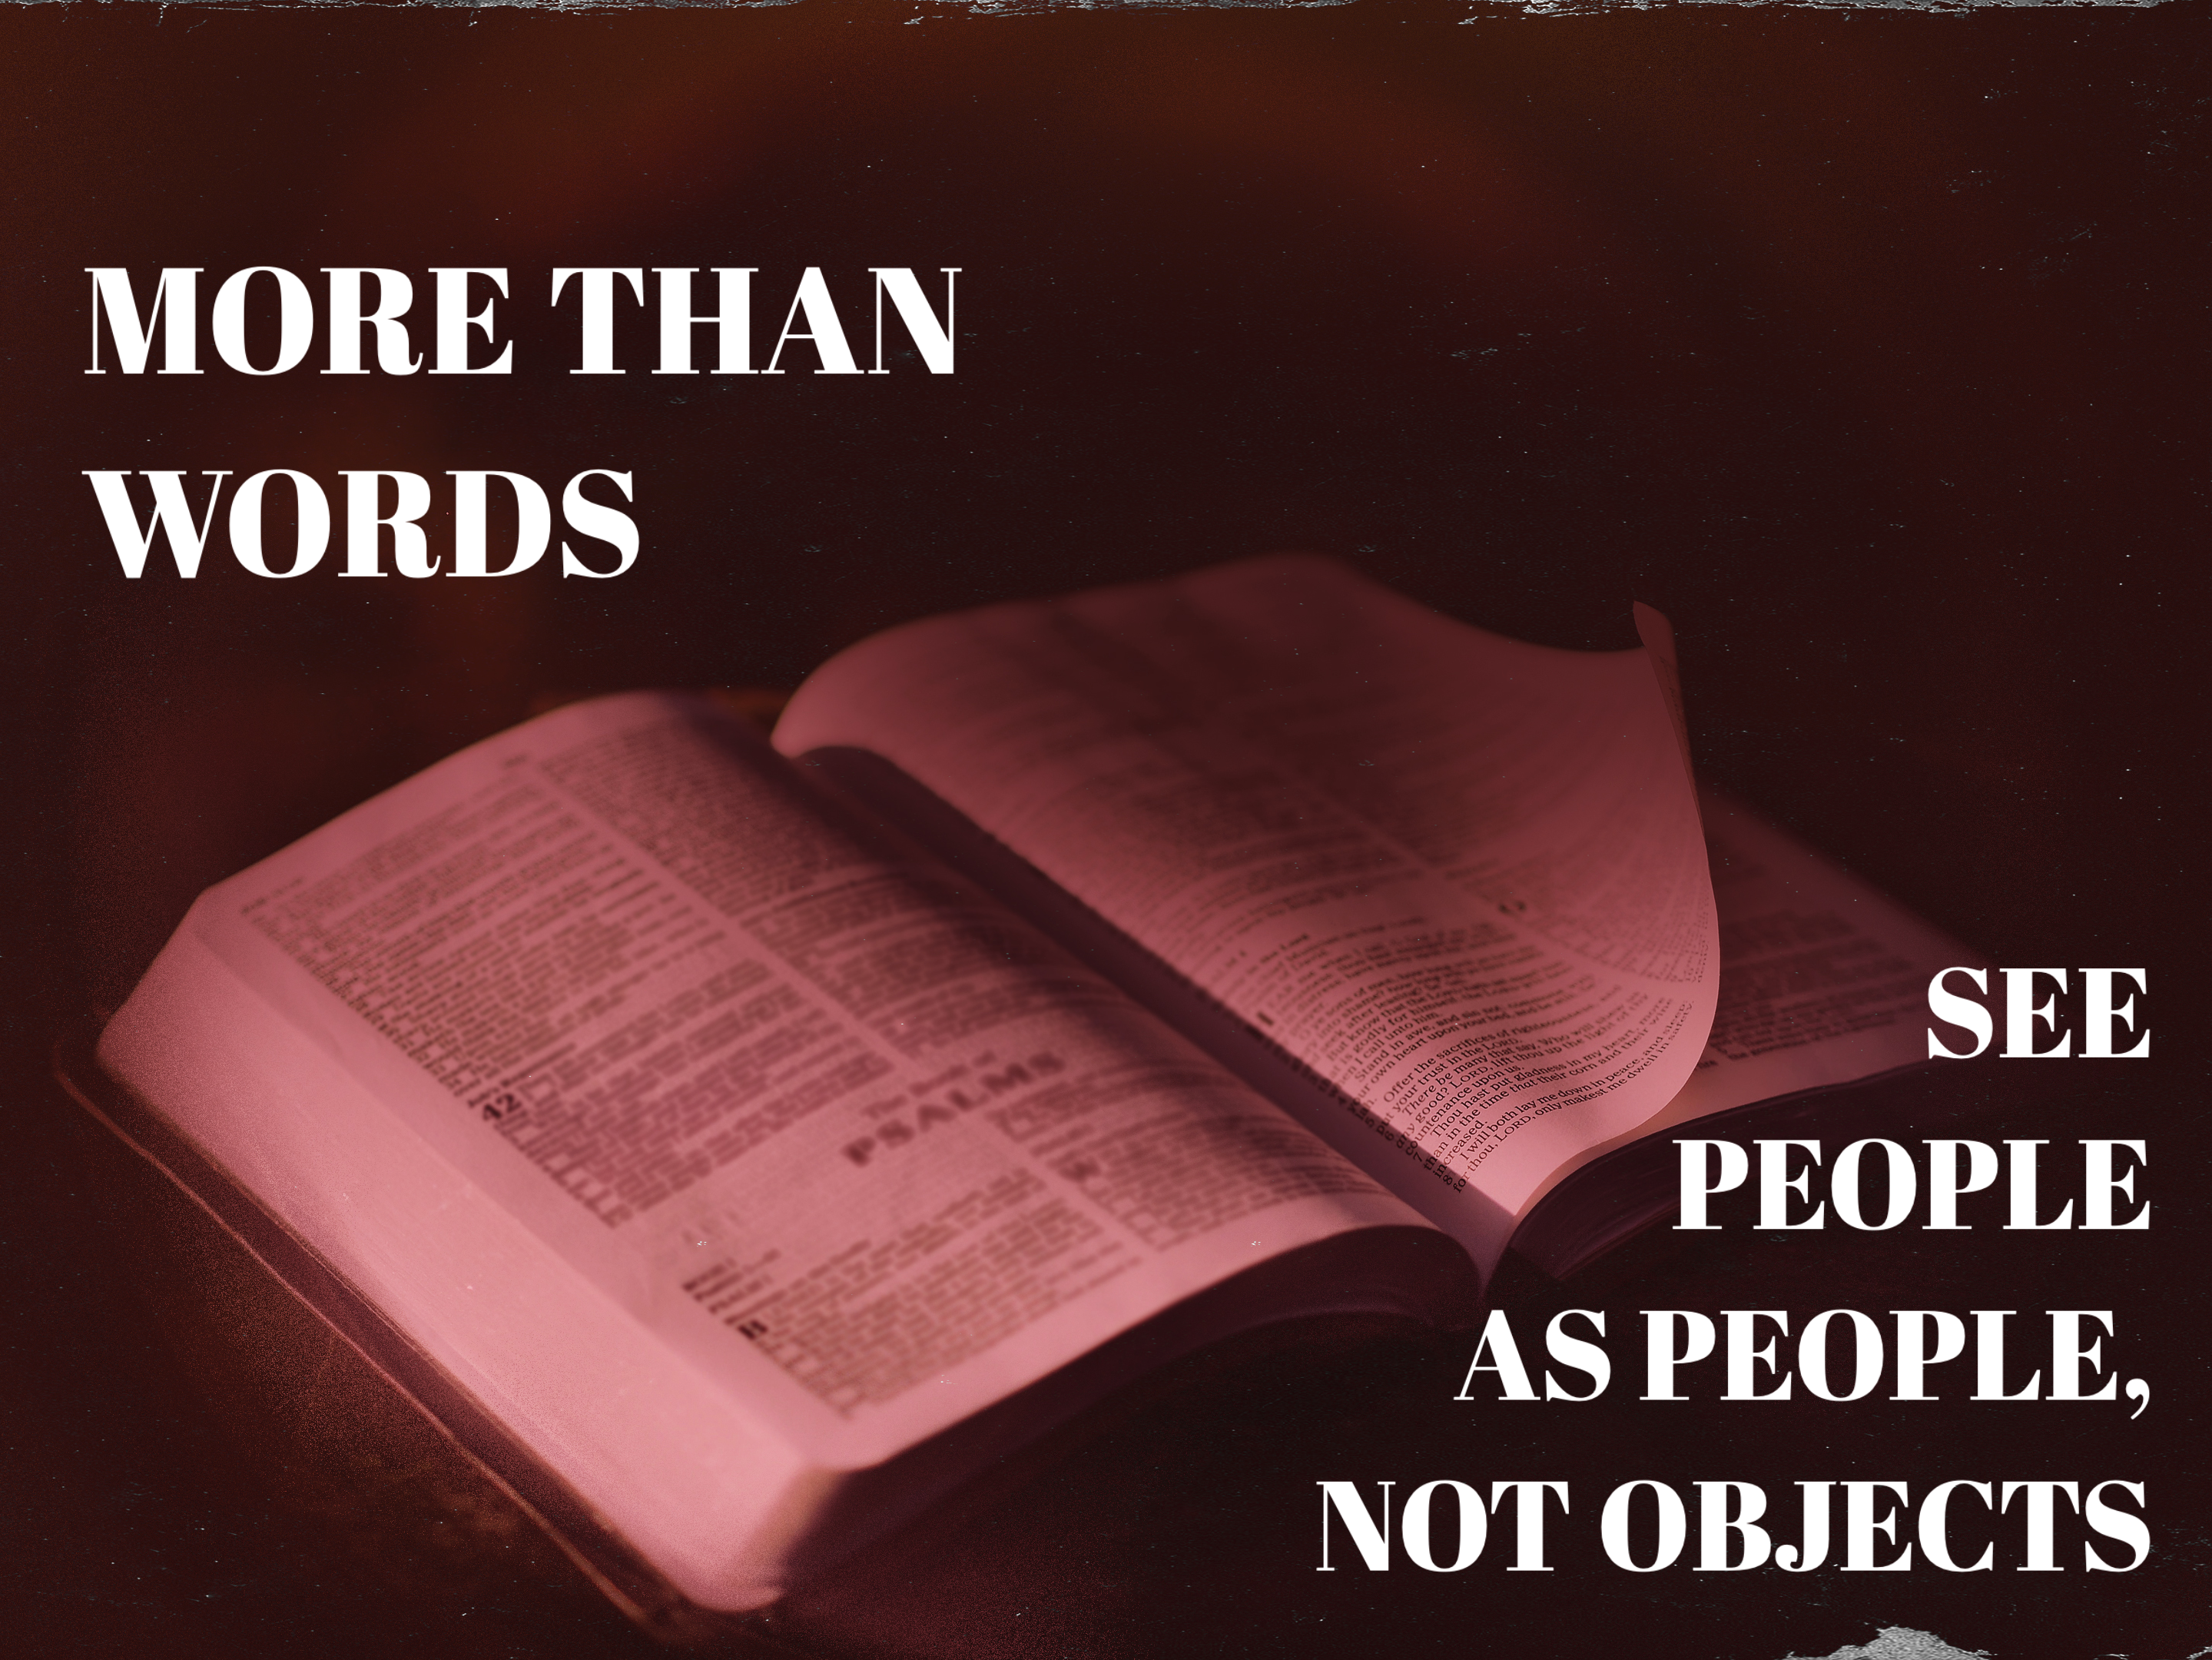 6 Words: See People as People, Not Objects